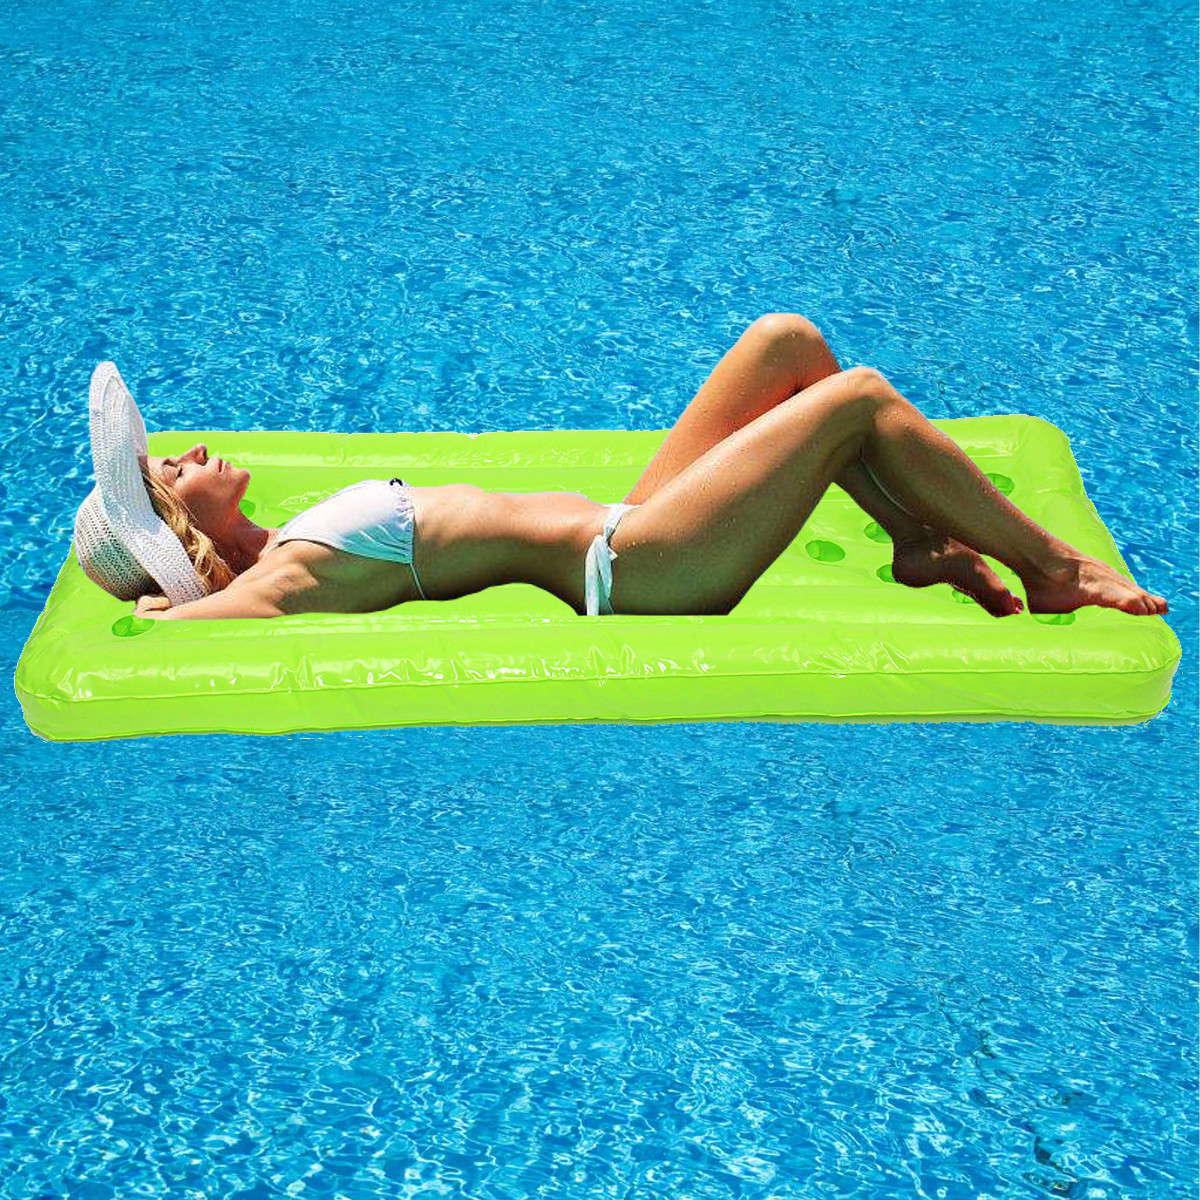 PVC-Inflatable-Beer-Pong-Table-22-Cup-Holes-Water-Floating-For-Pool-Party-Drinking-Game-1231571-9